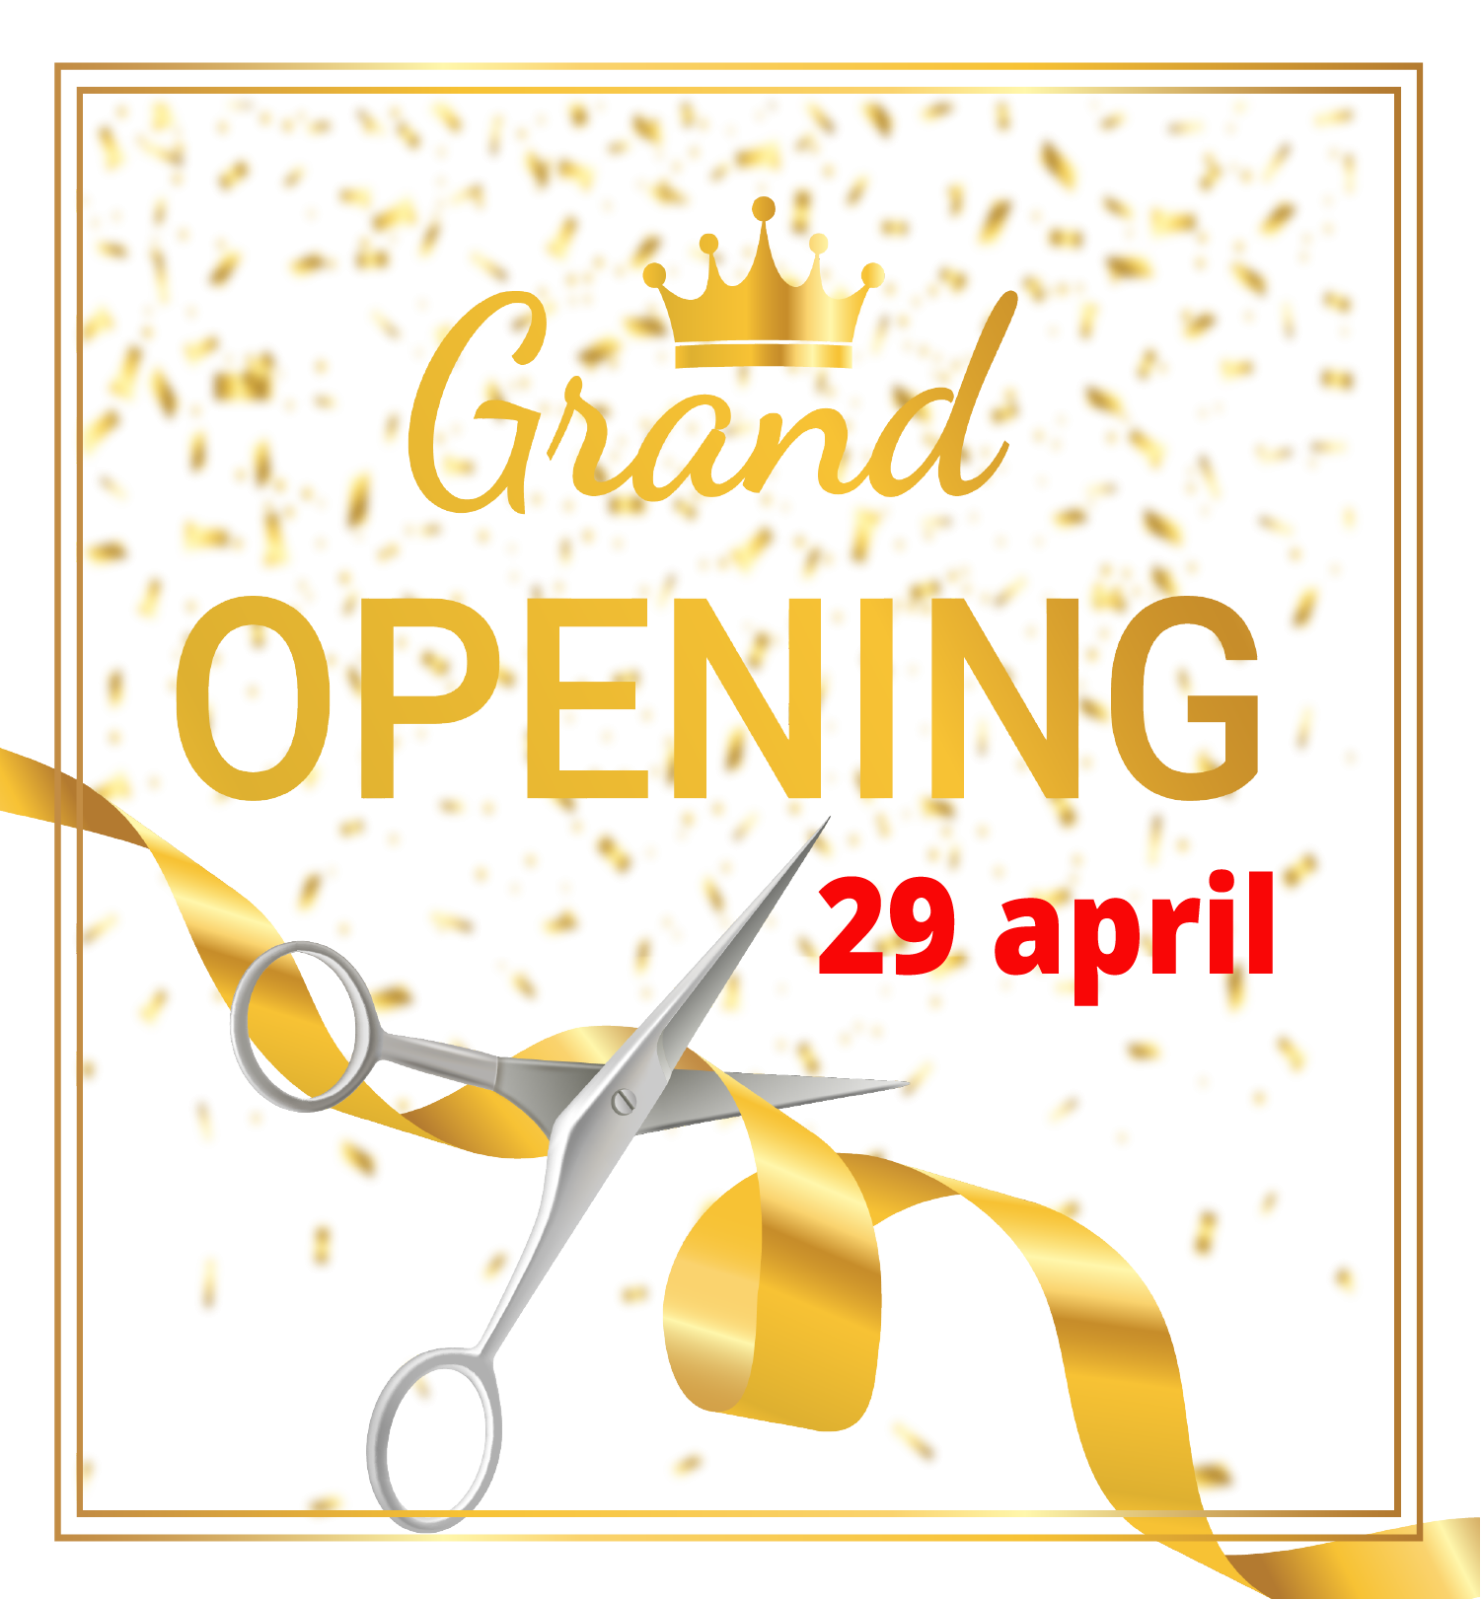 grand-opening--1679492097.png